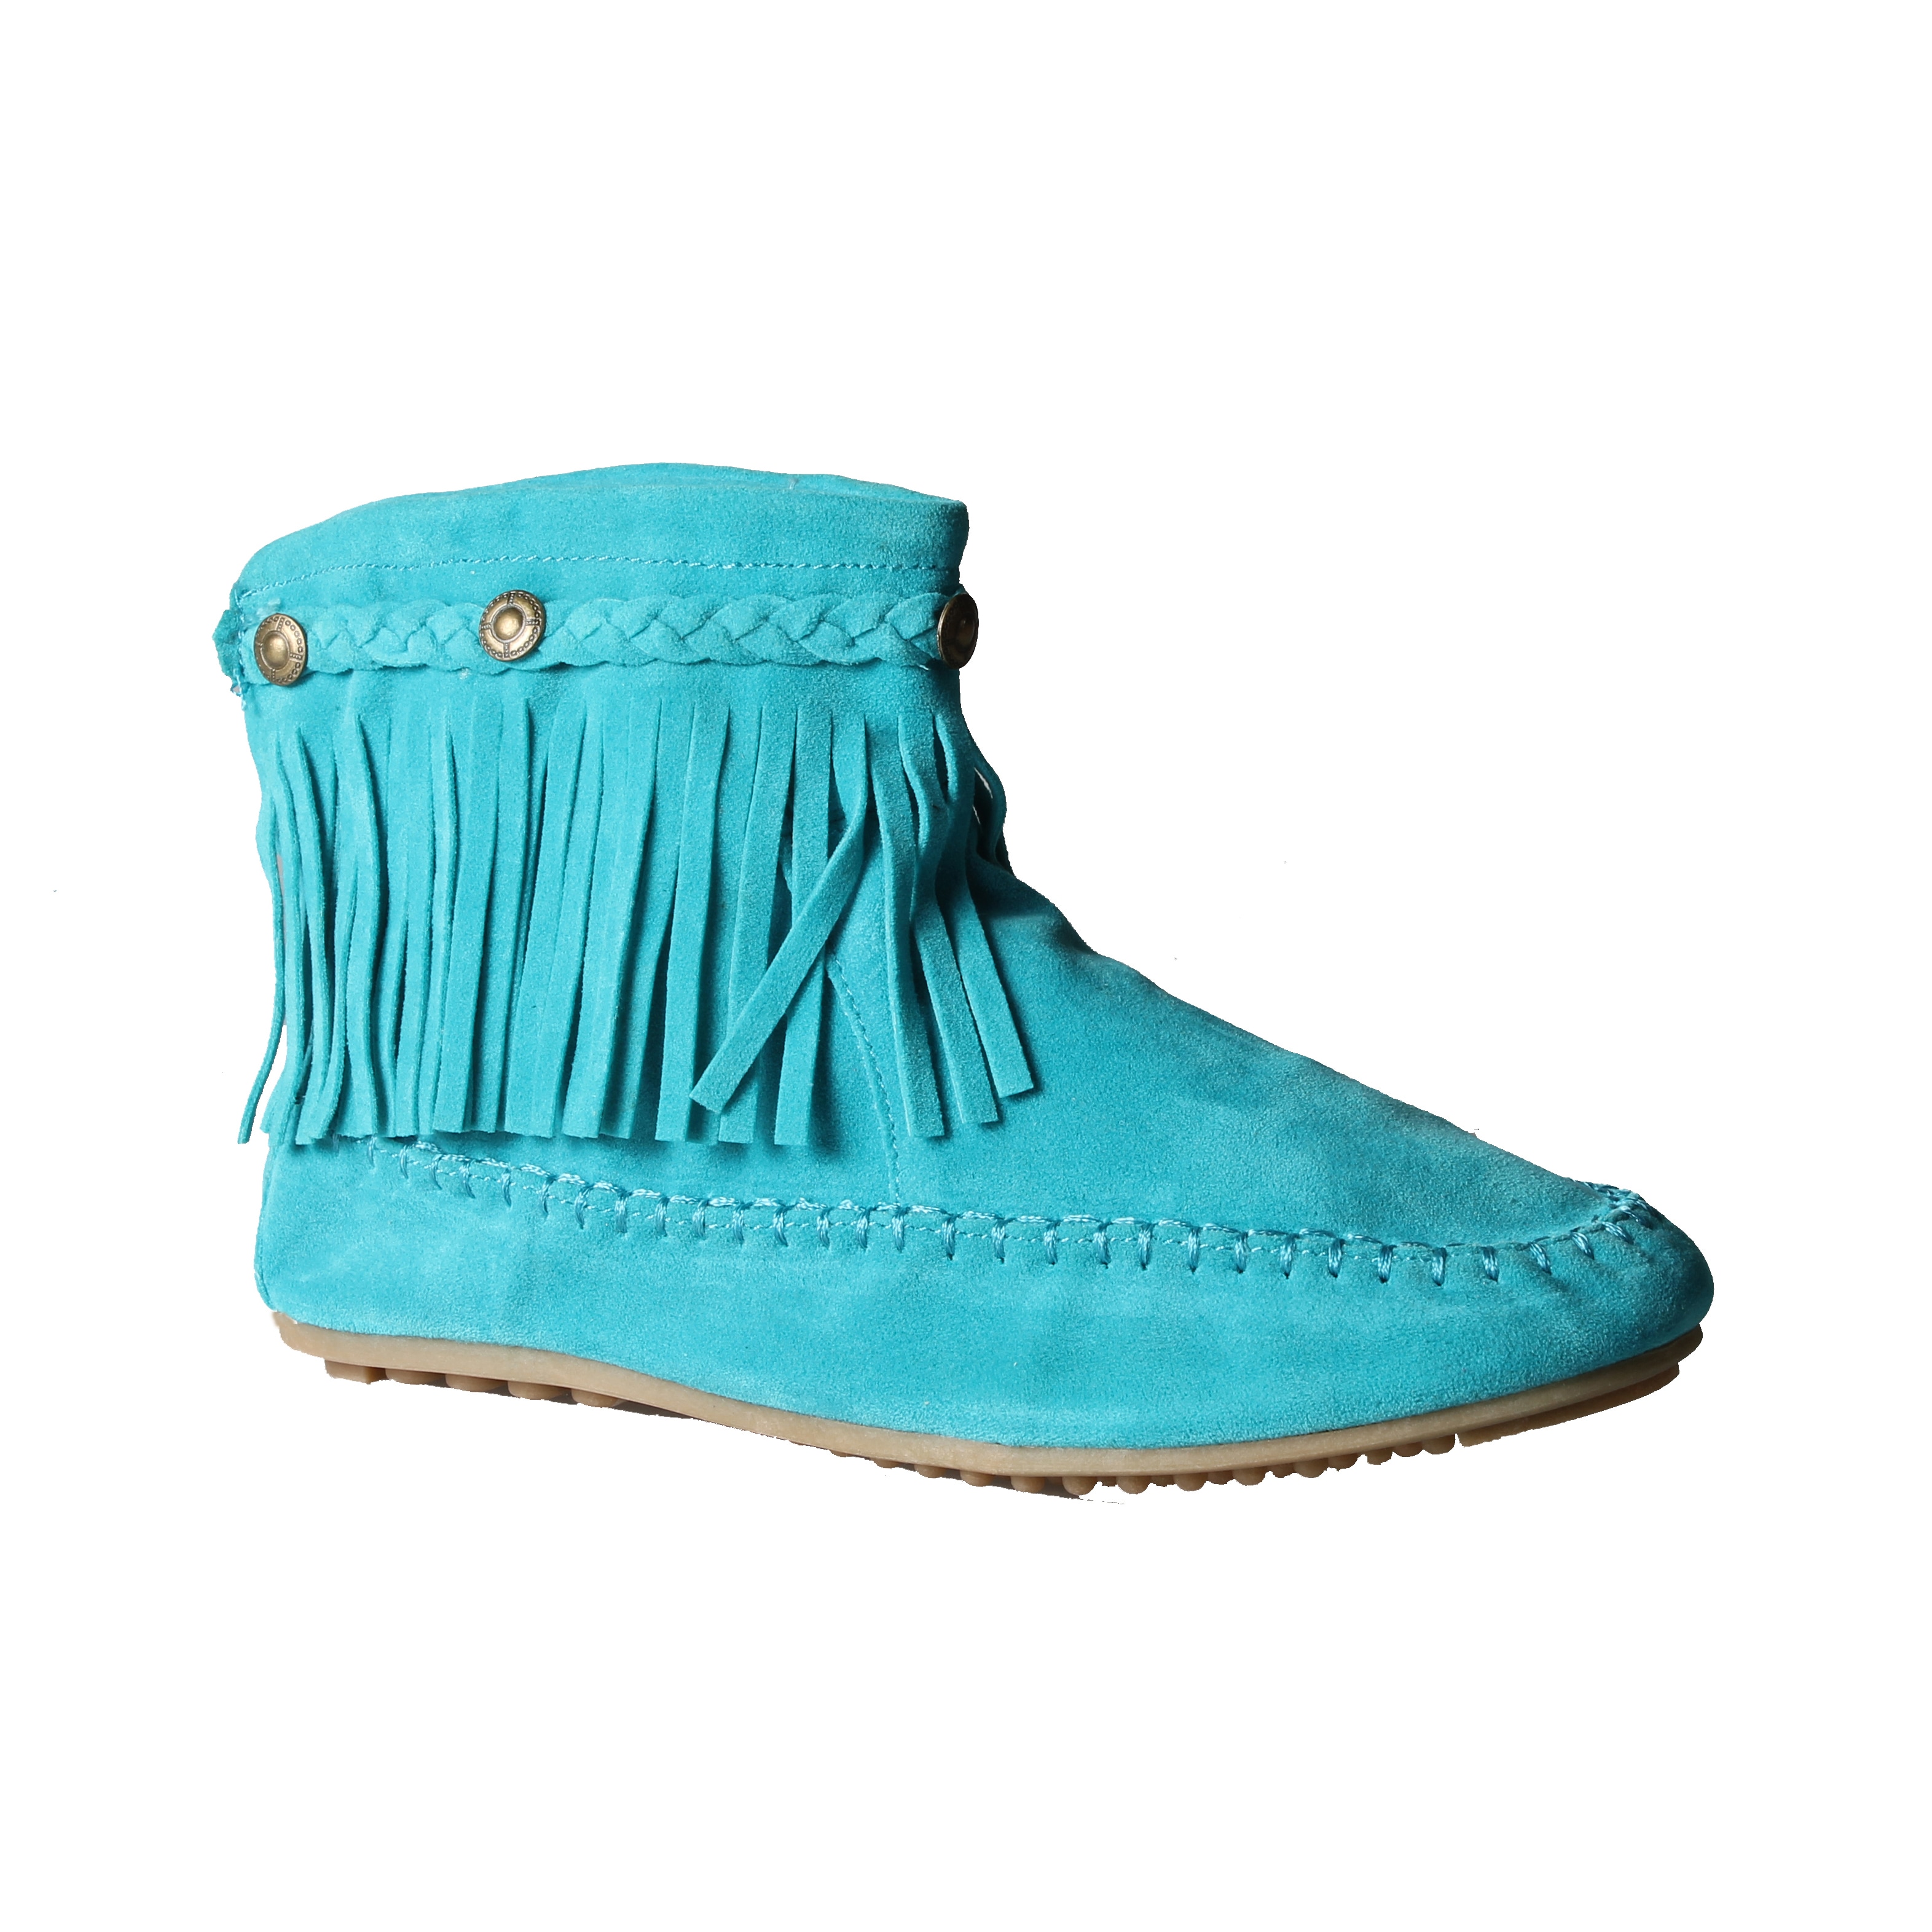 Teal Fringe Ankle Booties - Overstock 